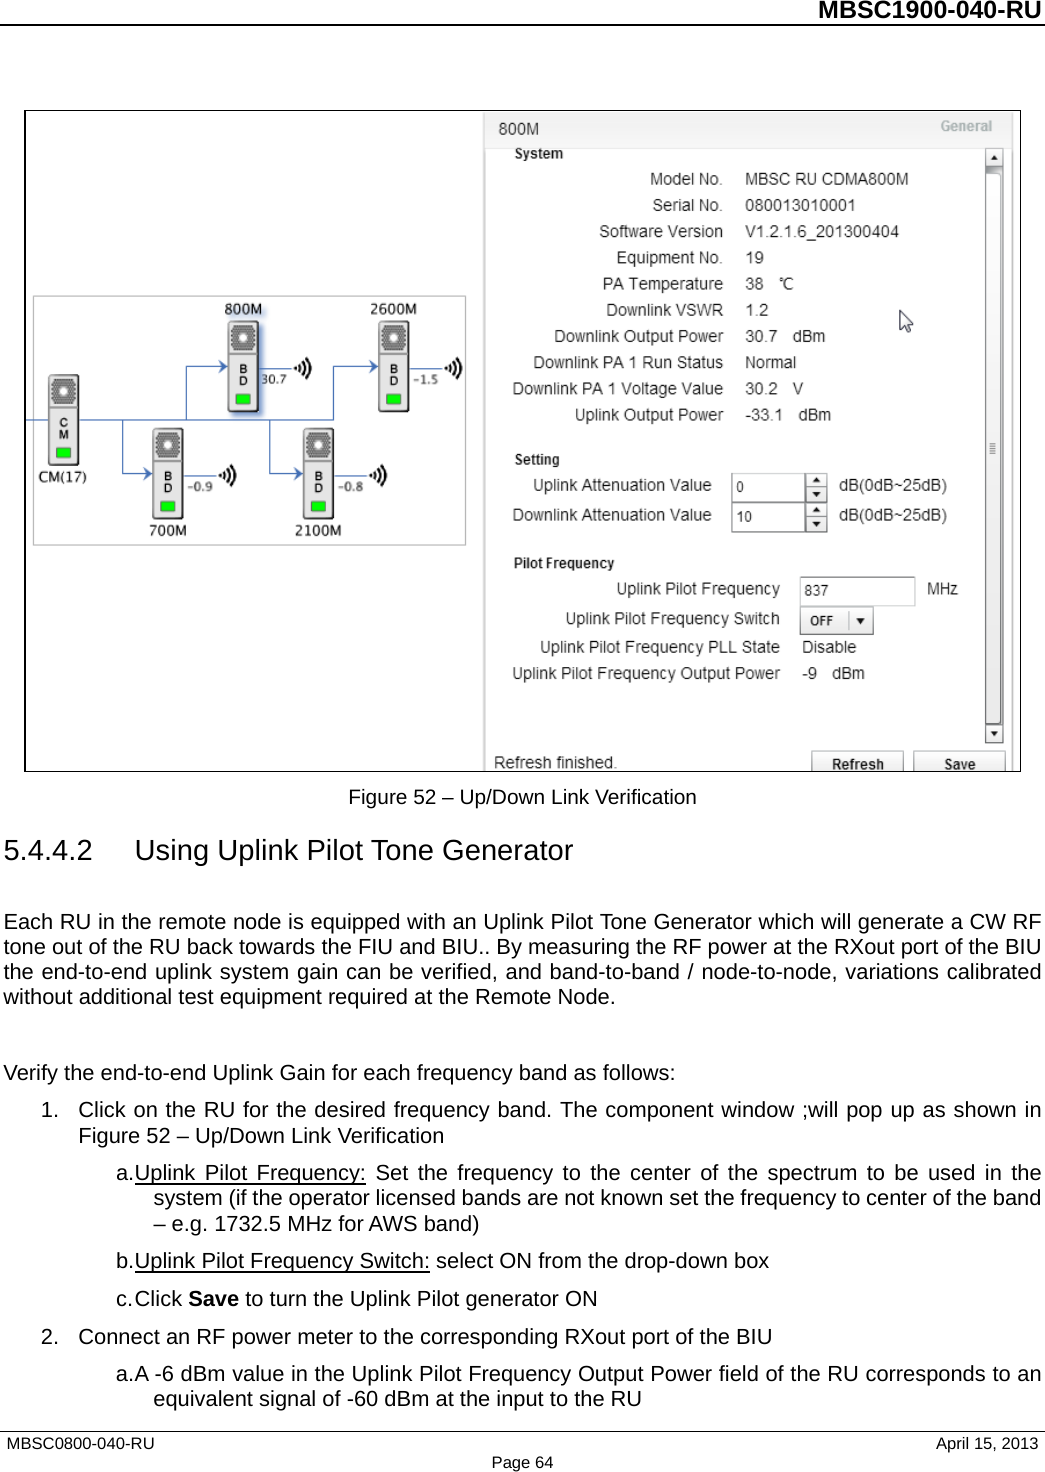          MBSC1900-040-RU    Figure 52 – Up/Down Link Verification 5.4.4.2 Using Uplink Pilot Tone Generator Each RU in the remote node is equipped with an Uplink Pilot Tone Generator which will generate a CW RF tone out of the RU back towards the FIU and BIU.. By measuring the RF power at the RXout port of the BIU the end-to-end uplink system gain can be verified, and band-to-band / node-to-node, variations calibrated without additional test equipment required at the Remote Node.  Verify the end-to-end Uplink Gain for each frequency band as follows: 1. Click on the RU for the desired frequency band. The component window ;will pop up as shown in Figure 52 – Up/Down Link Verification a. Uplink Pilot Frequency: Set the frequency to the center of the spectrum to be used in the system (if the operator licensed bands are not known set the frequency to center of the band – e.g. 1732.5 MHz for AWS band) b. Uplink Pilot Frequency Switch: select ON from the drop-down box c. Click Save to turn the Uplink Pilot generator ON 2. Connect an RF power meter to the corresponding RXout port of the BIU a. A -6 dBm value in the Uplink Pilot Frequency Output Power field of the RU corresponds to an equivalent signal of -60 dBm at the input to the RU MBSC0800-040-RU                                      April 15, 2013 Page 64 